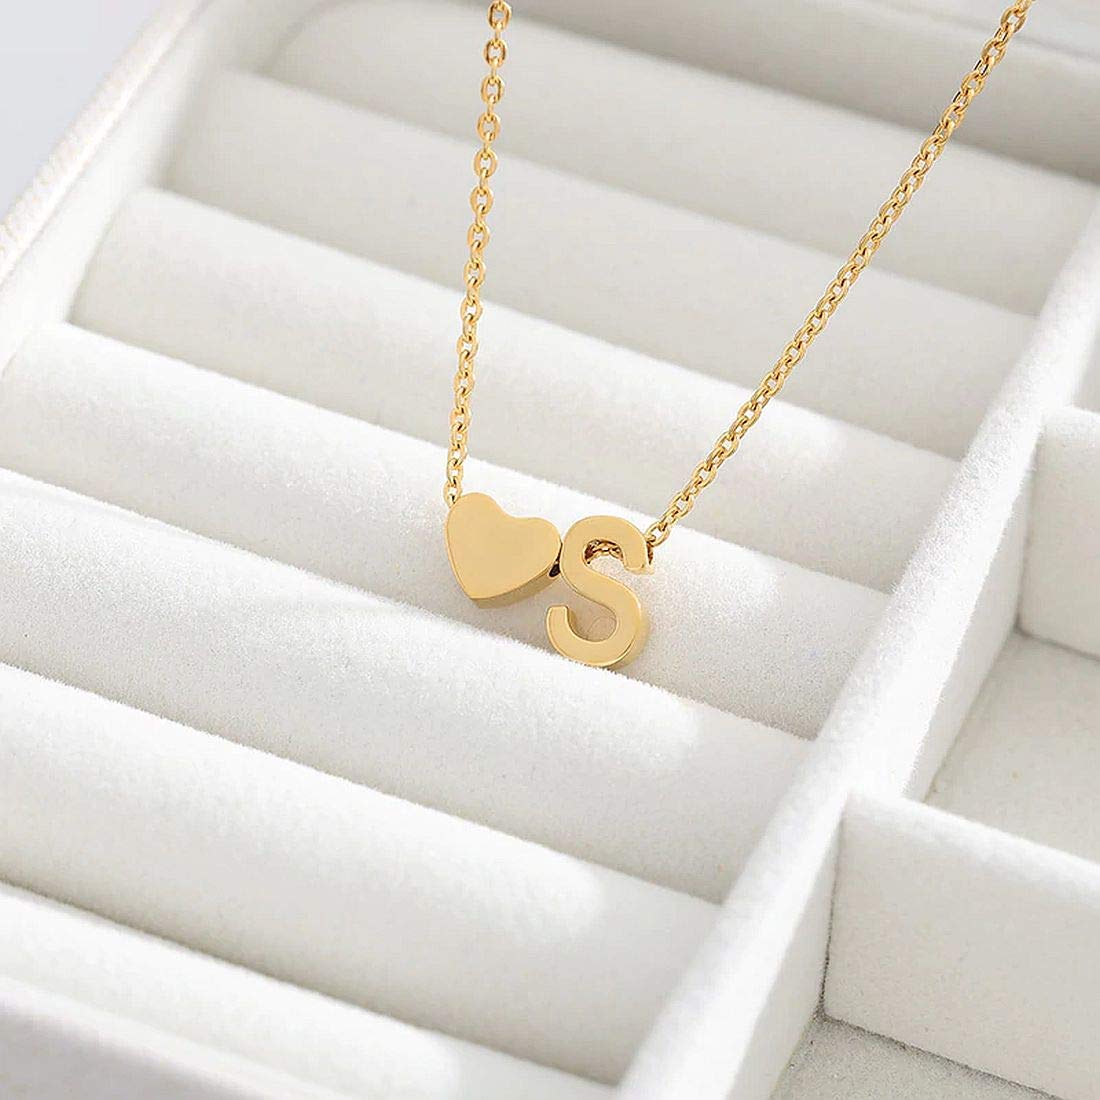 ARZONAI Gorgeous Alphabet 'S' & Tiny Heart Pendant Locket Chain Double Pendant Initial Letter n Cute Heart; Necklace Gift for Girls Women On Birthday Anniversary Valentine Occasions (Gold)